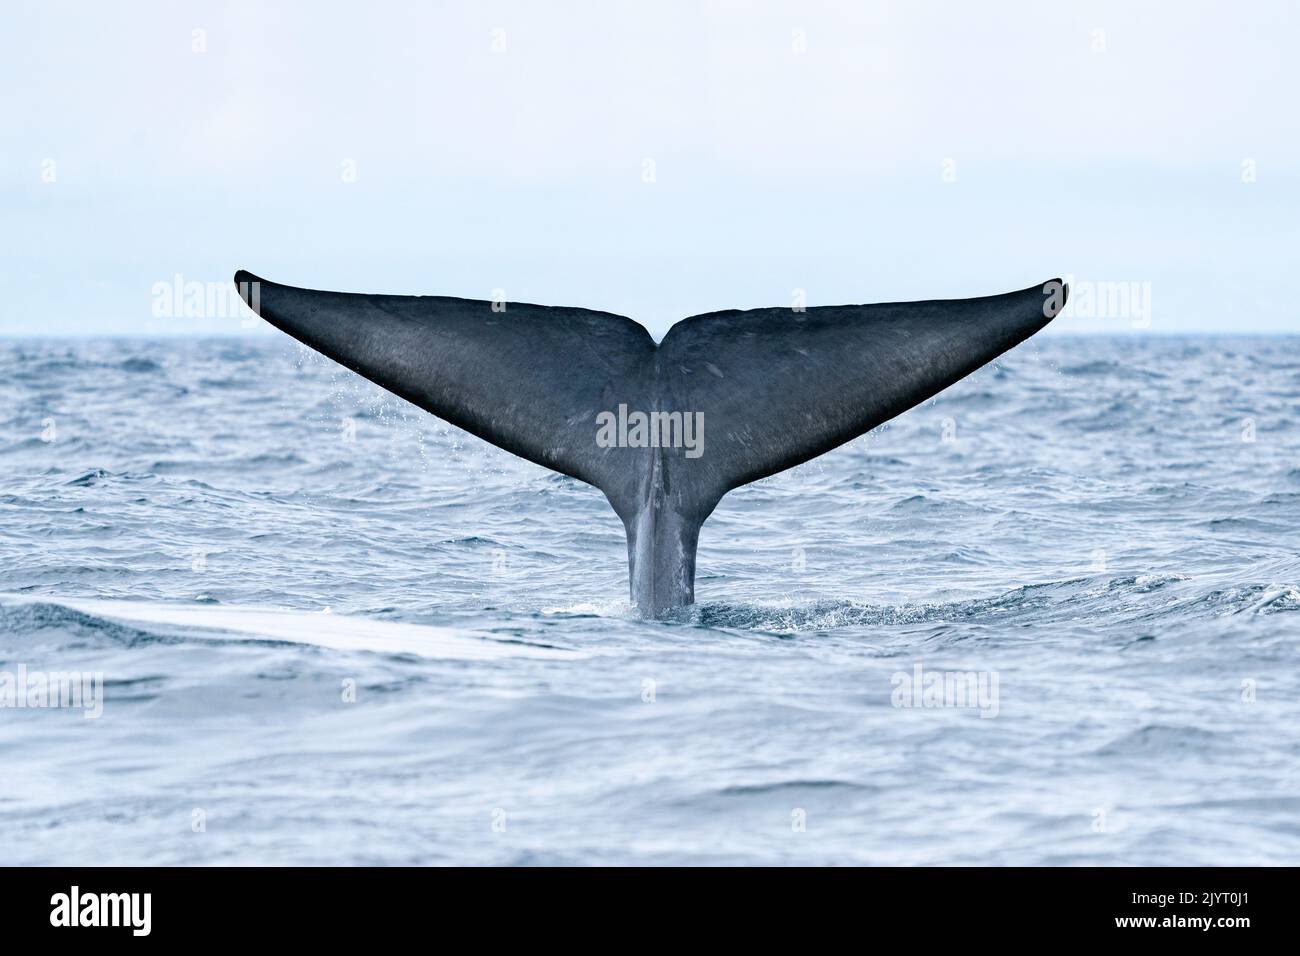 Tail of Blue whale diving (Balaenoptera musculus) Reaching a maximum confirmed length of 30 meters and weighing up to 200 tons, it is the largest animal known to have ever existed. Azores, Portugal, Atlantic Ocean. Stock Photo